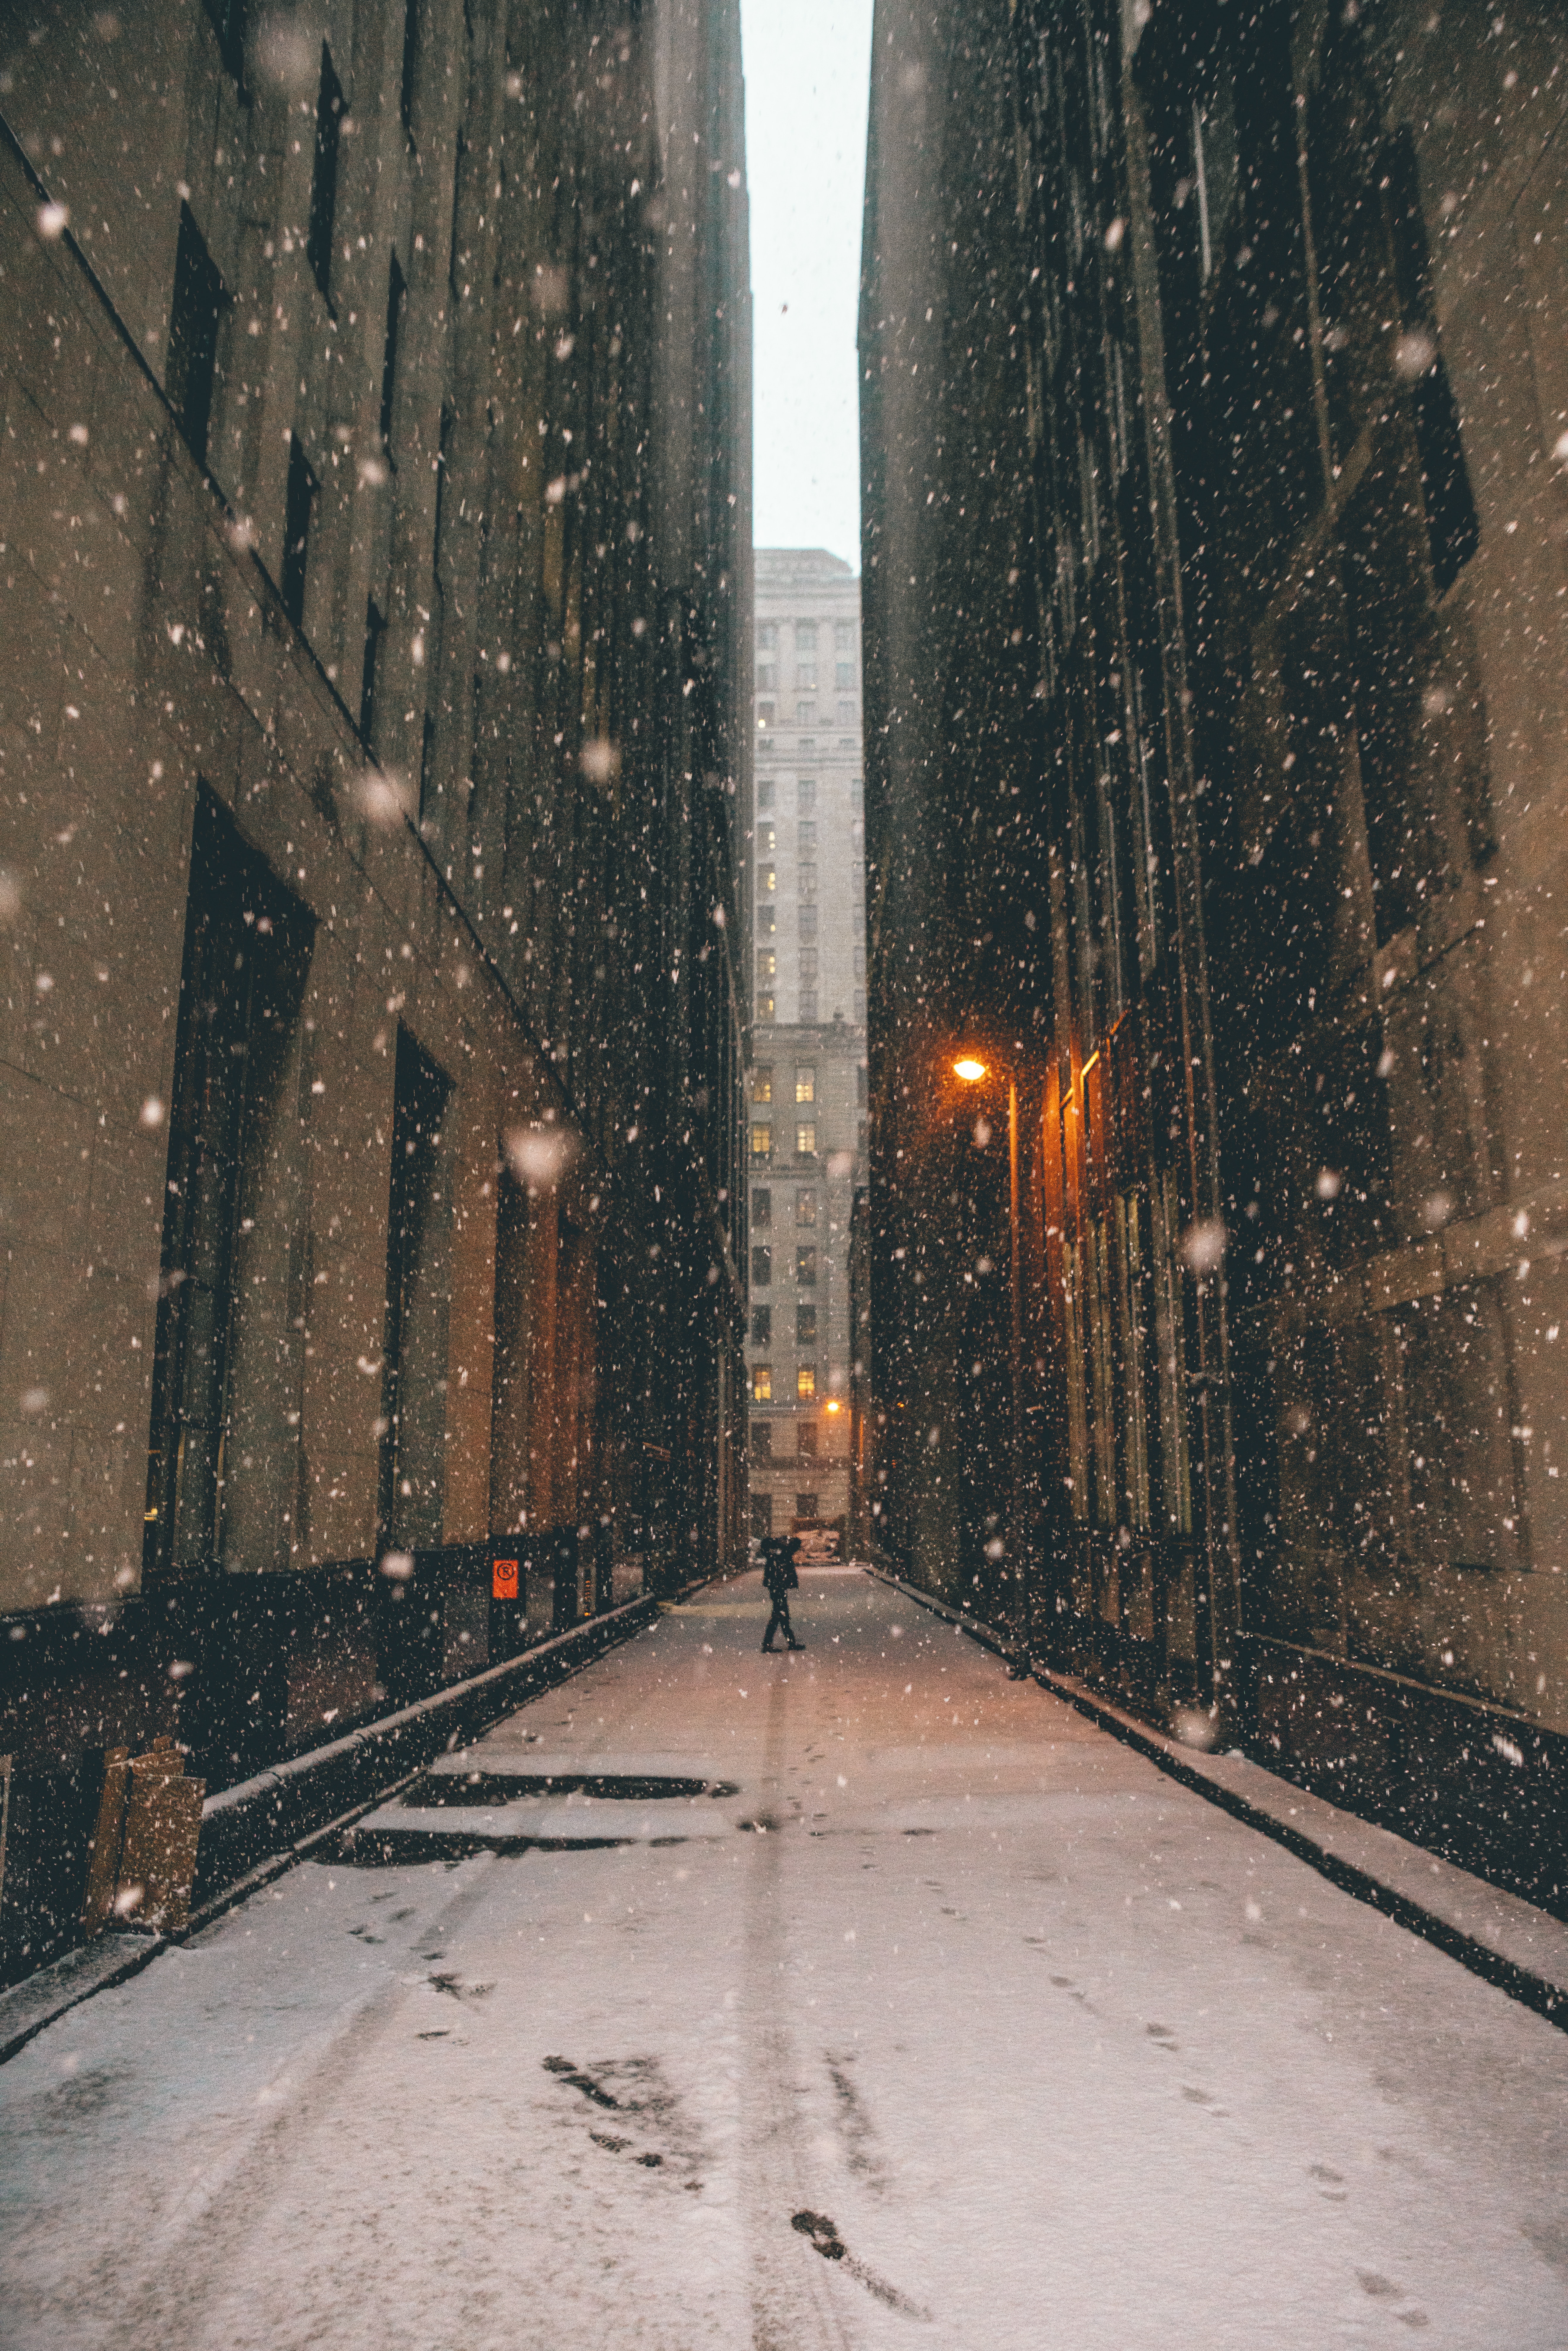 Snow falling in City